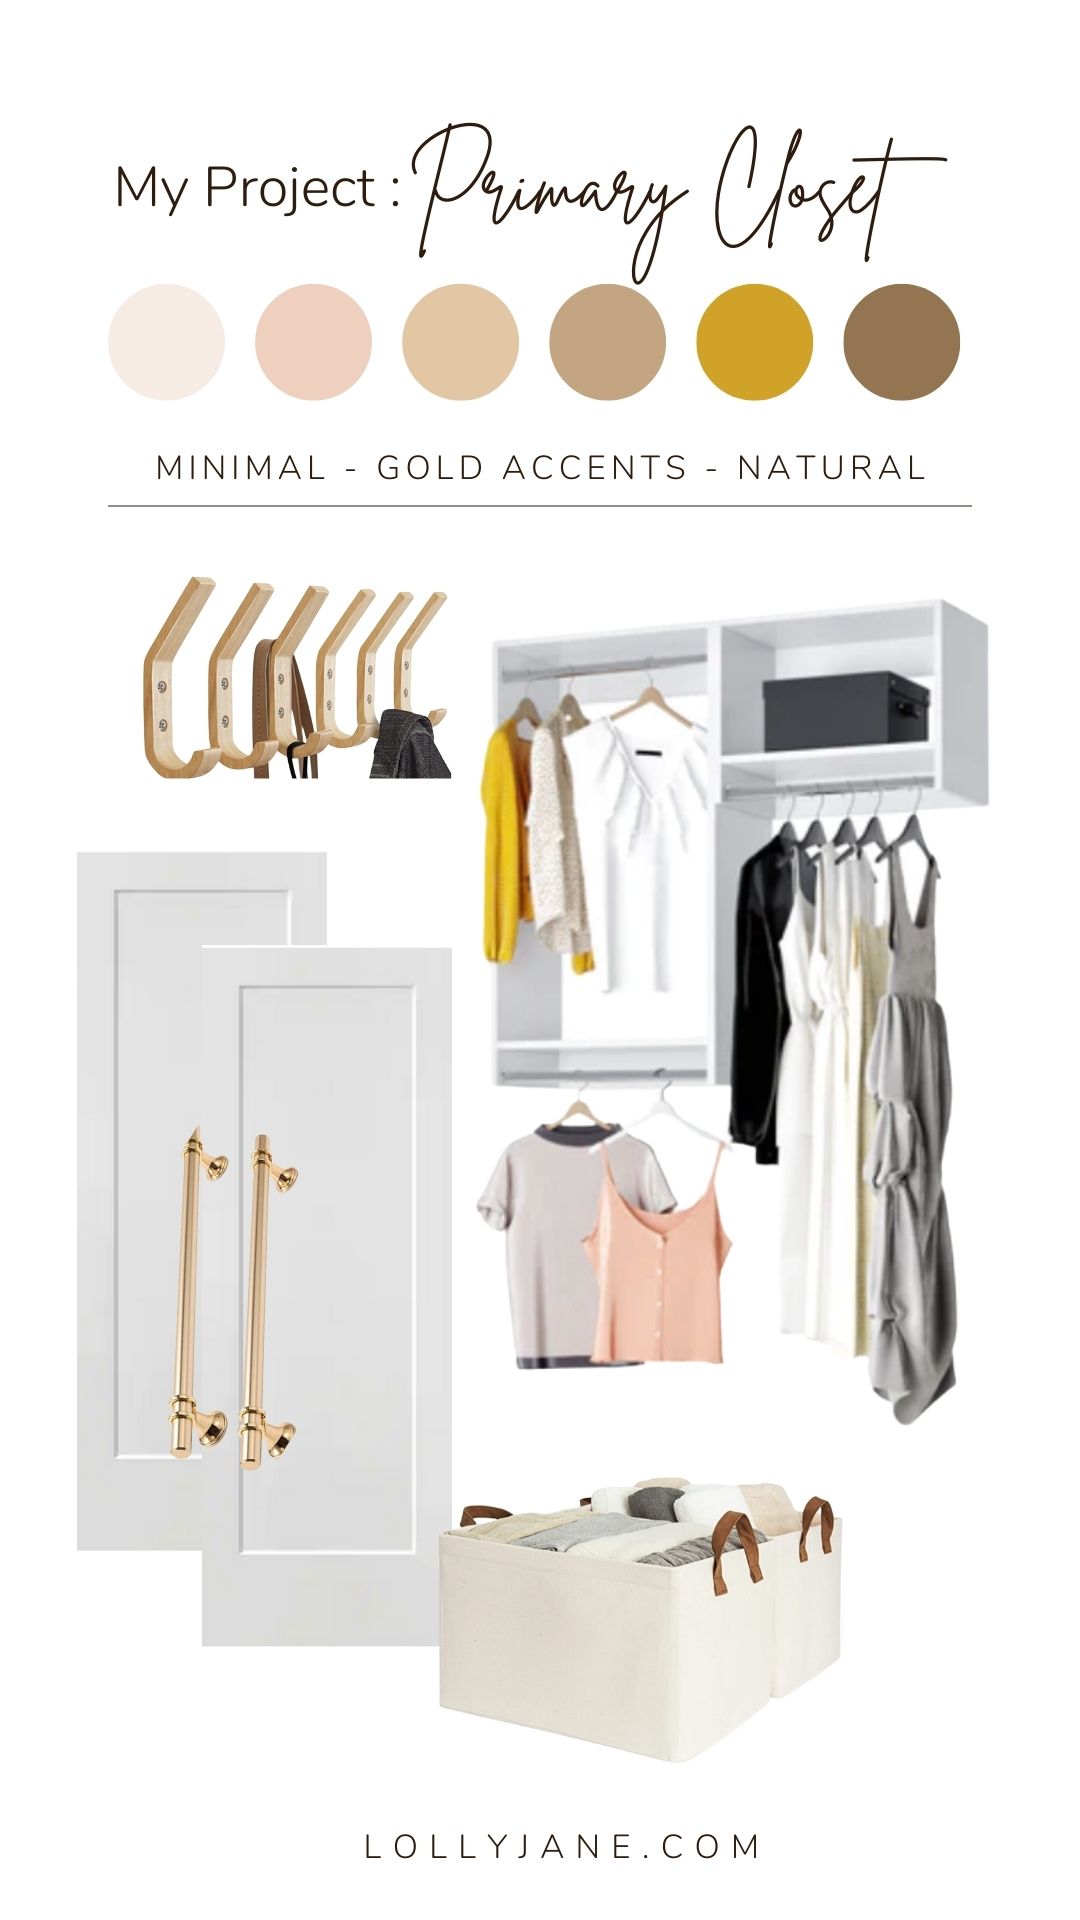 Have a small closet but need to maximize space? Design a modular closet! We're so excited to create the perfect primary modular closet, just check out our inspiration with this mood board!